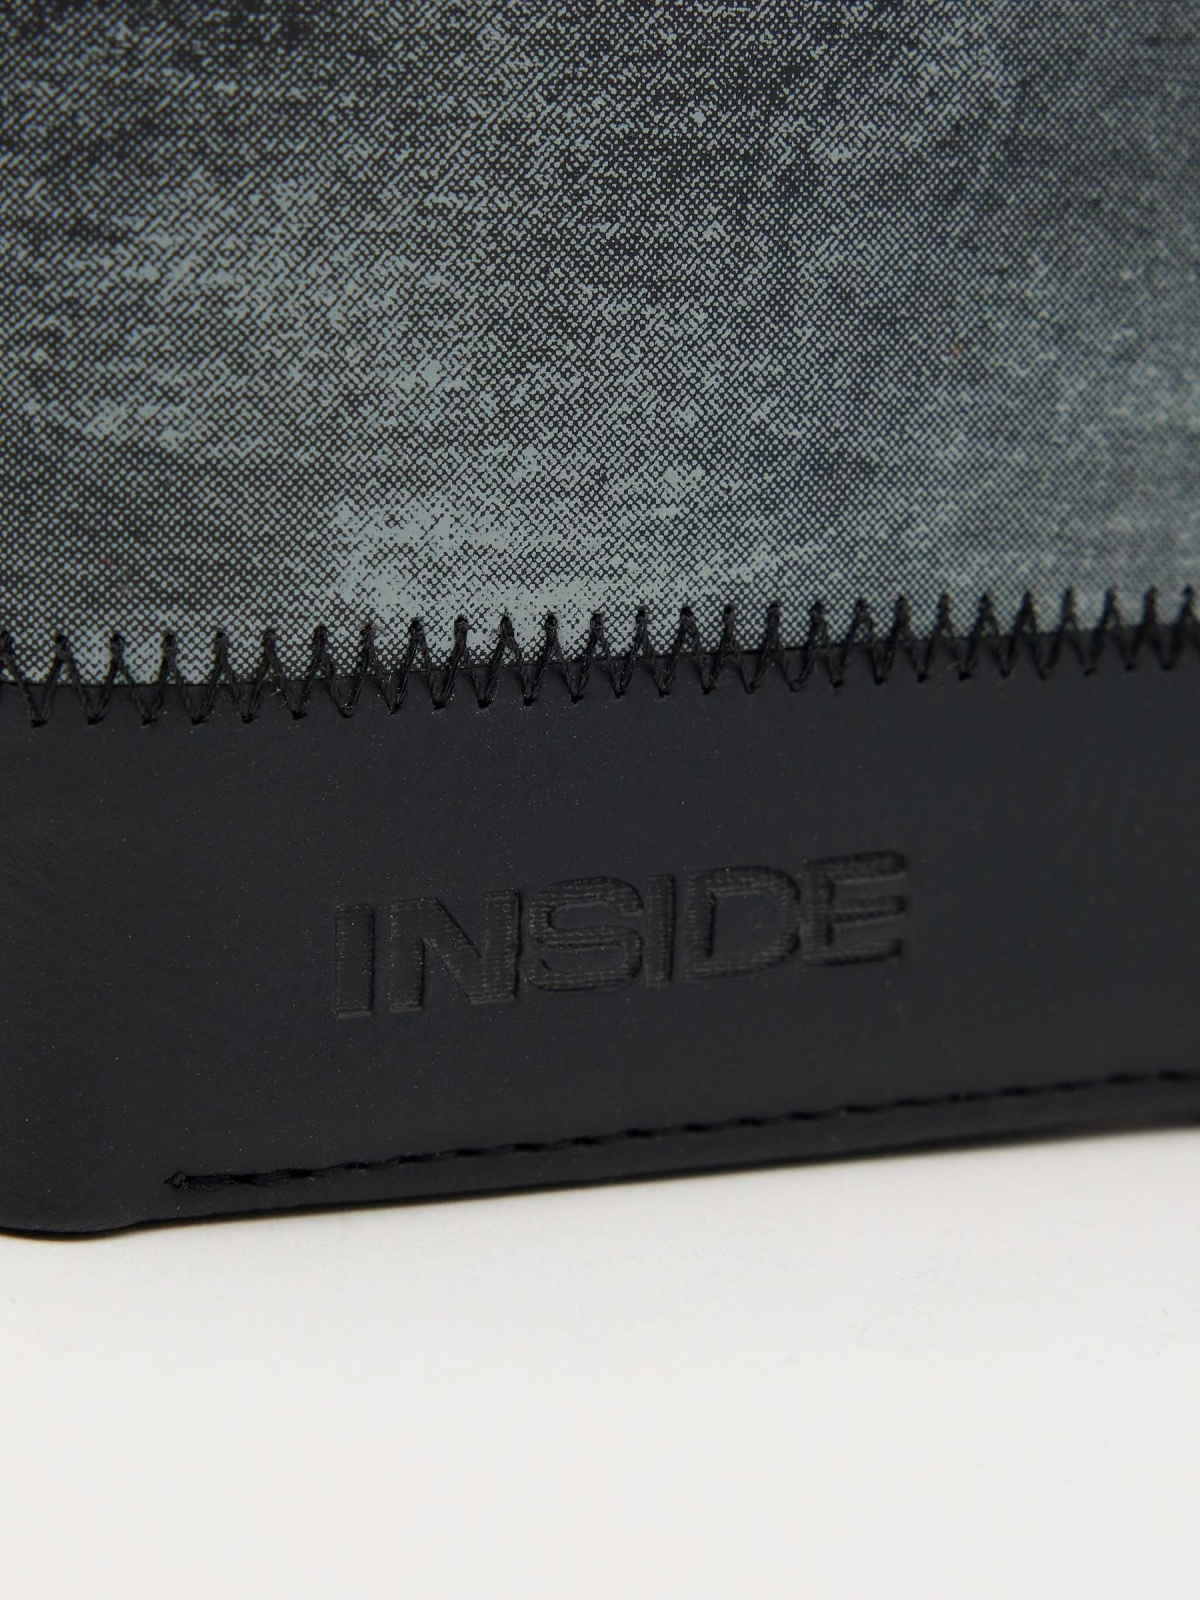 Leatherette wallet with rubber clasp black detail view